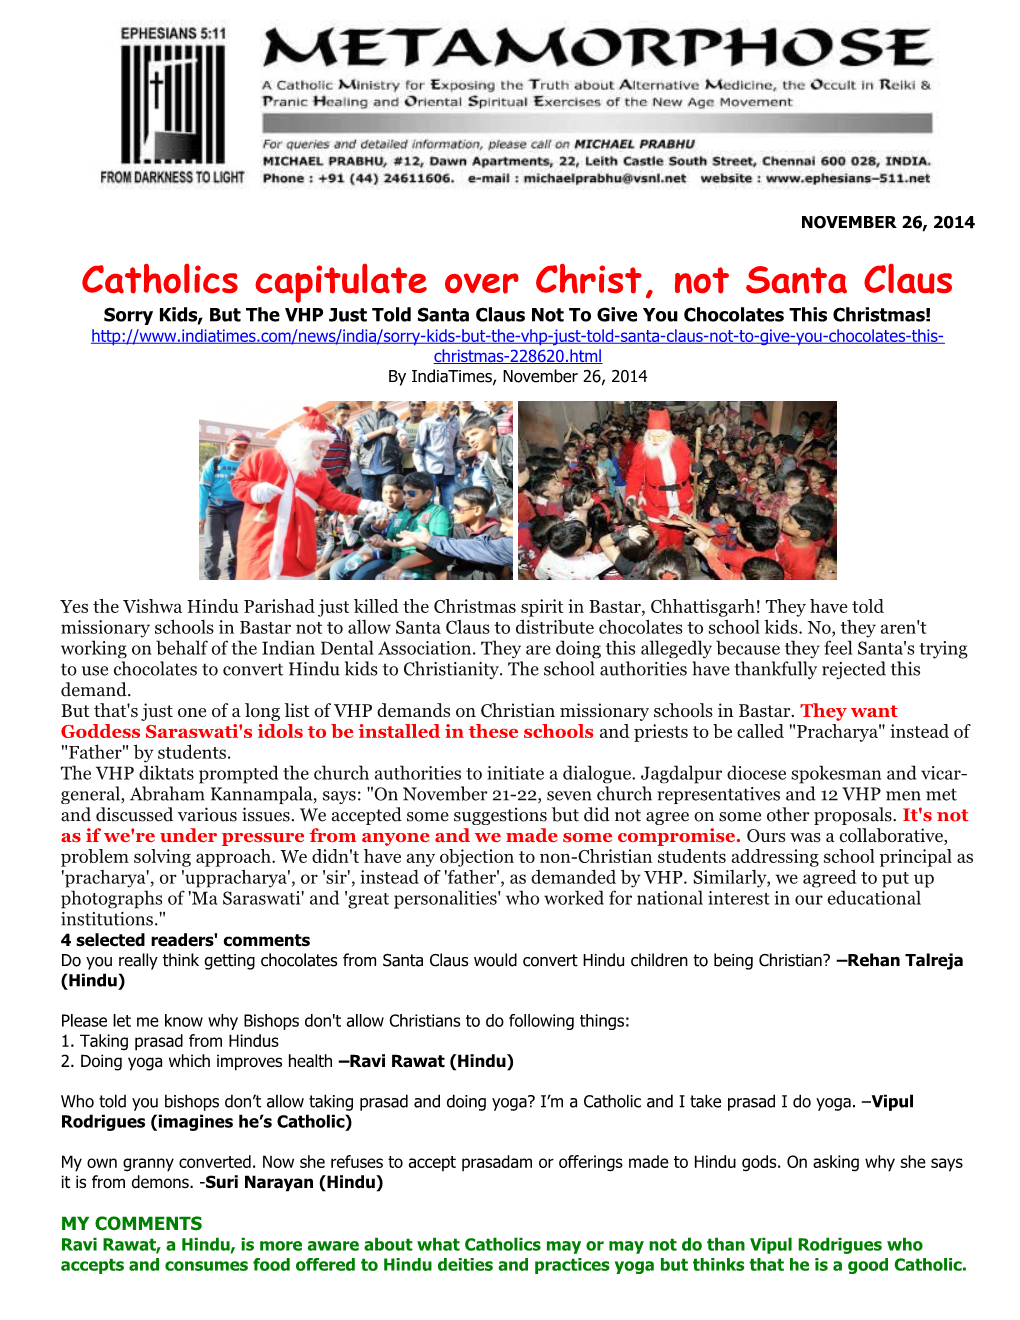 Catholics Capitulate Over Christ,Not Santa Claus